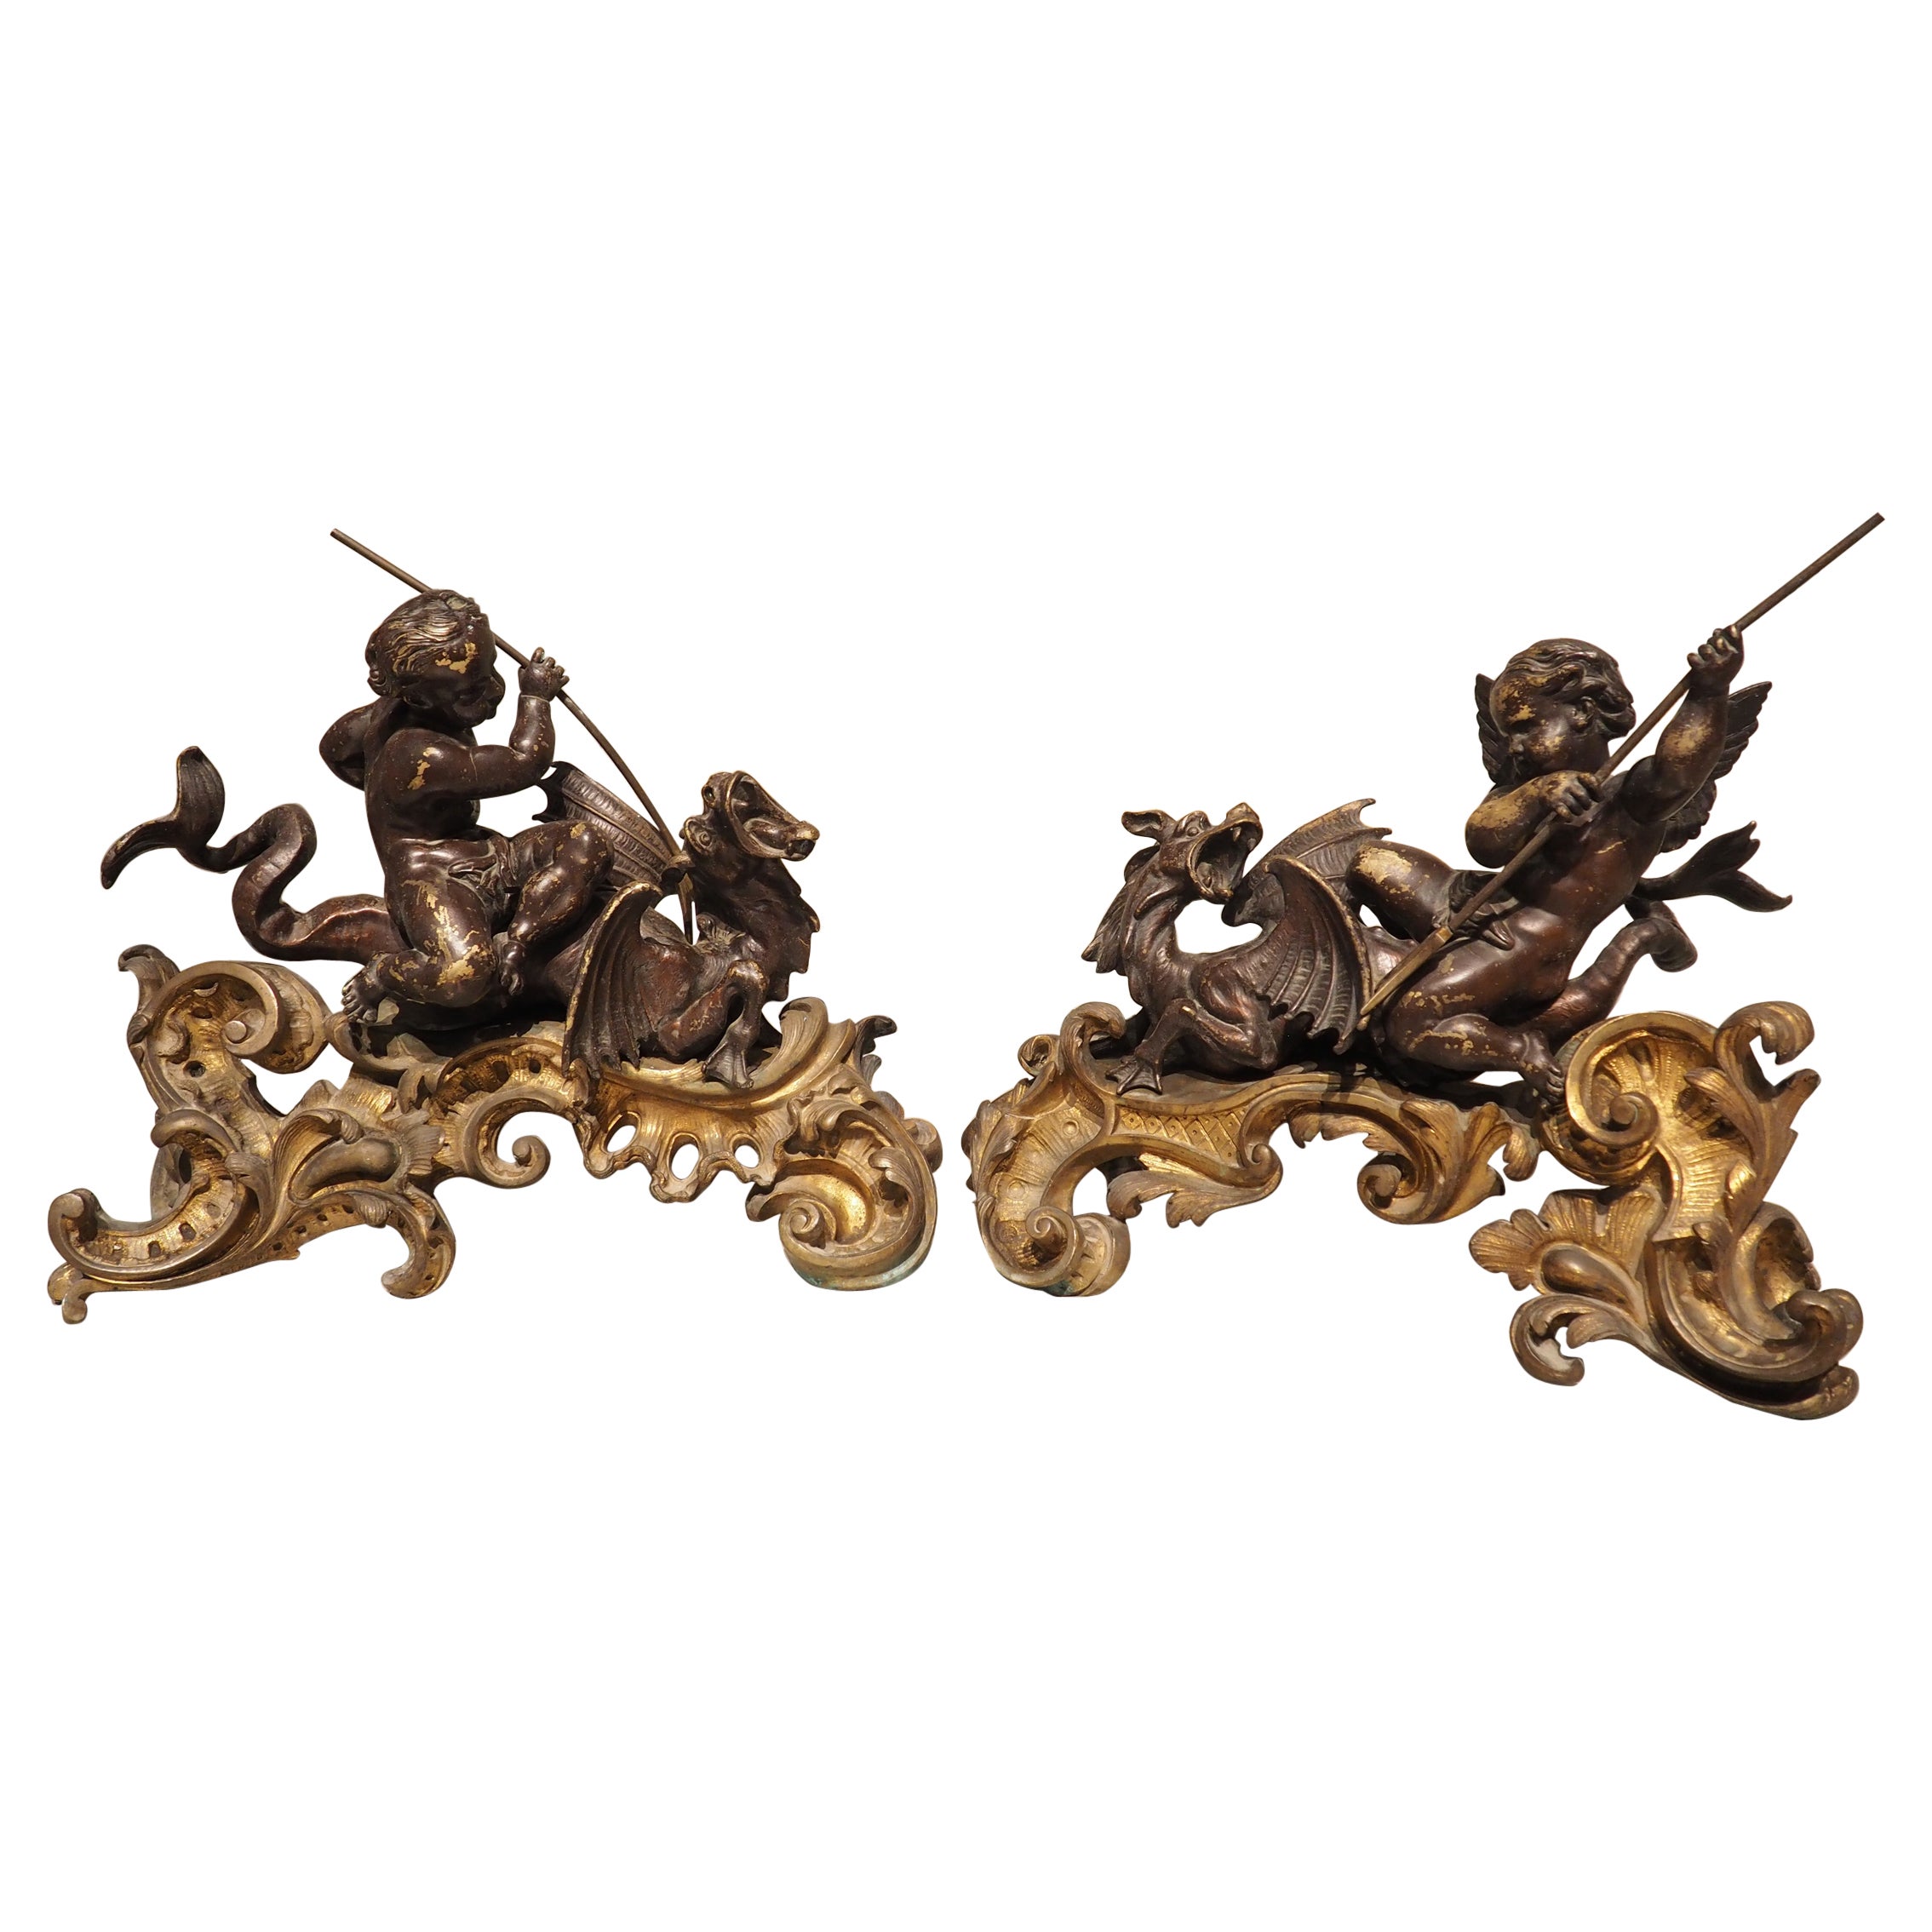 Impressive Pair of circa 1850 French Bronze Chenets with Putti and Dragons For Sale